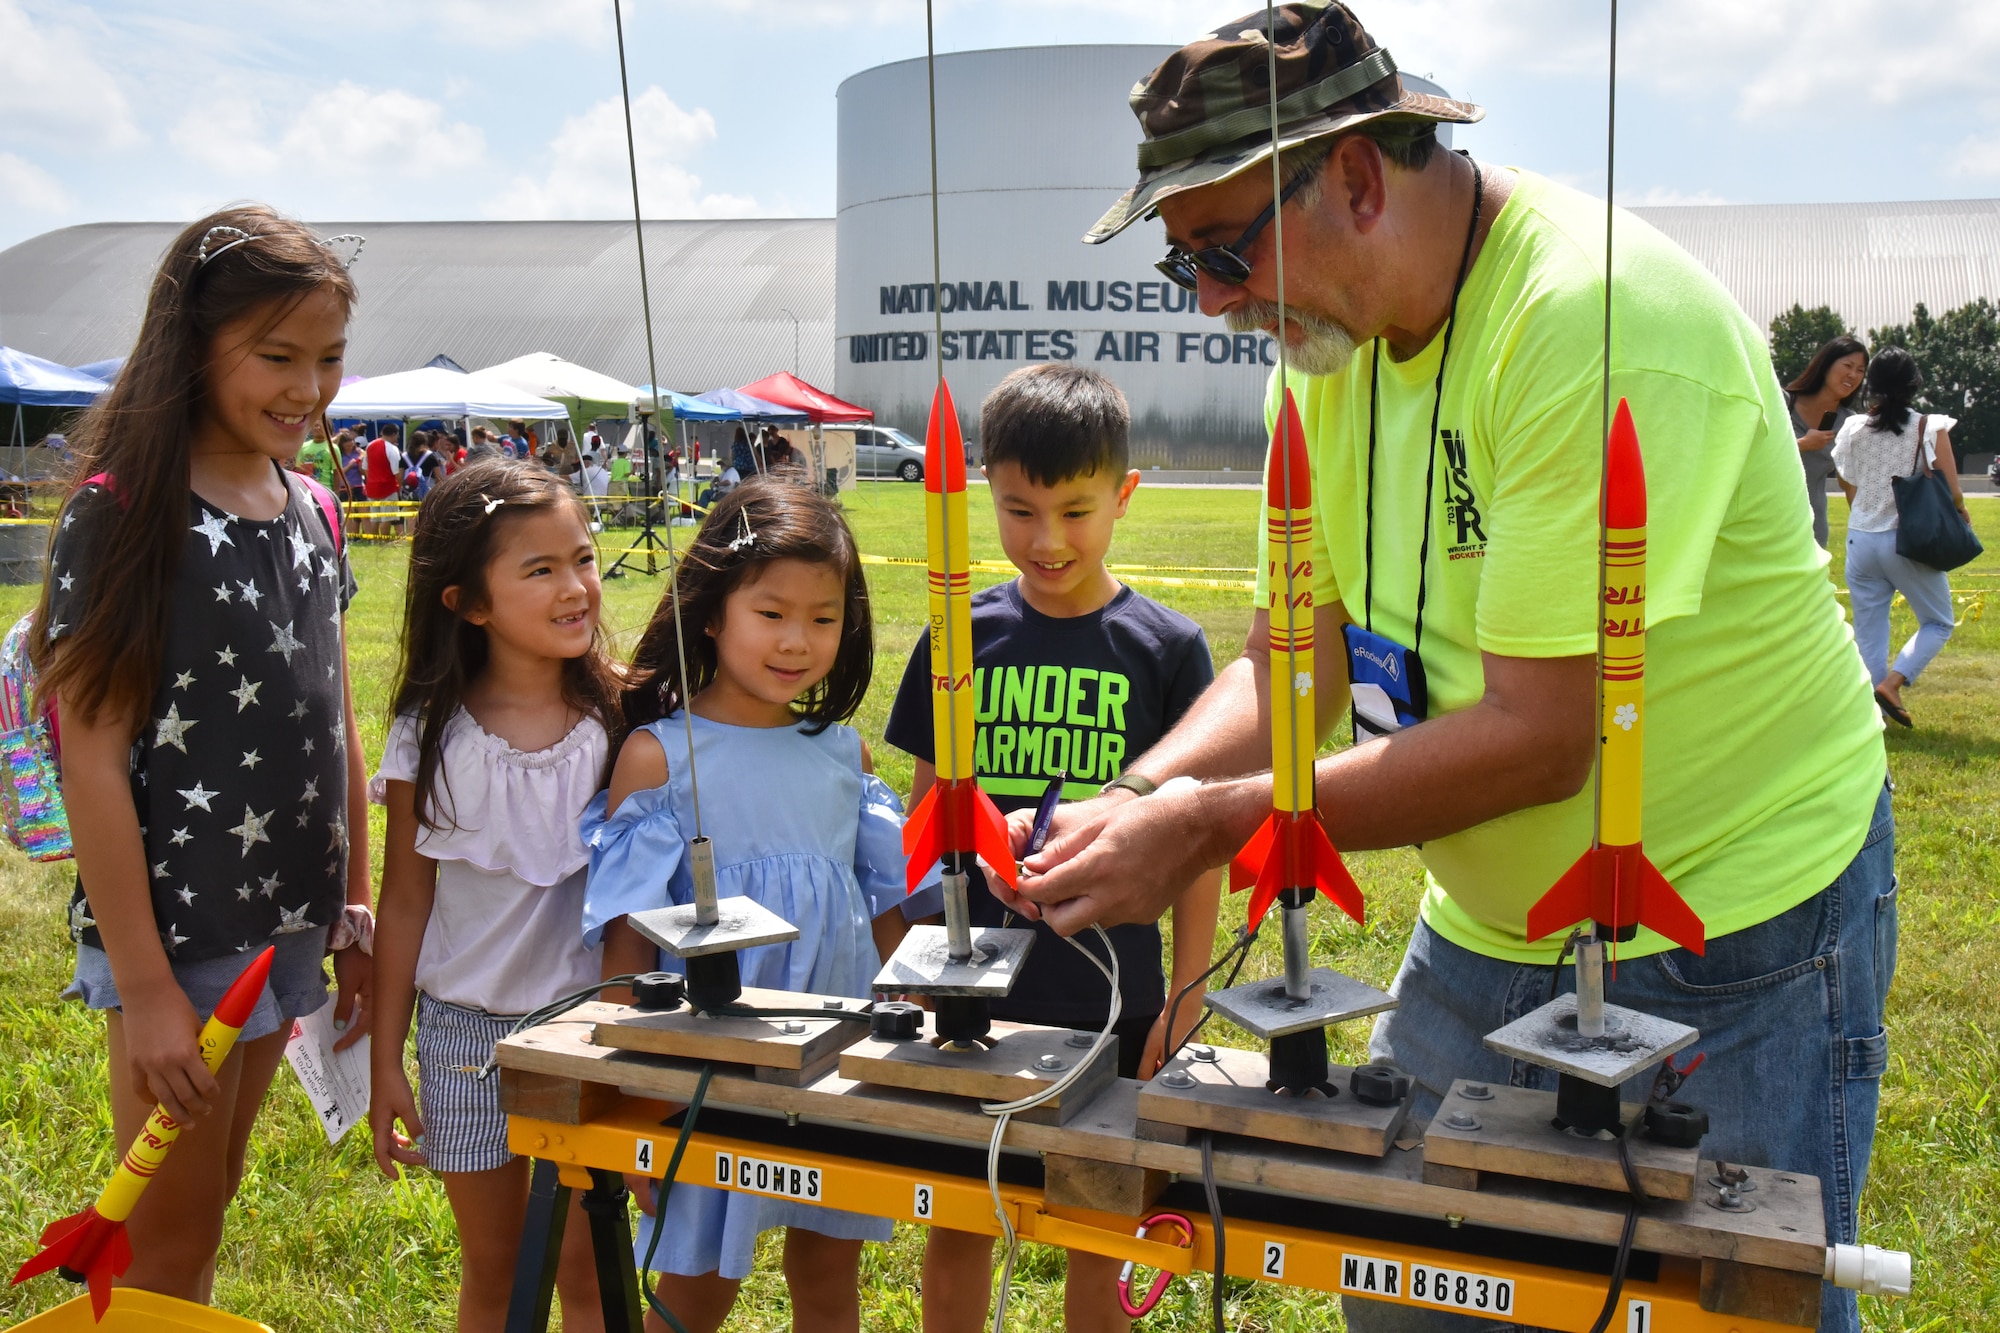 DAYTON, Ohio -- Museum visitors had the chance to meet an astronaut; build and launch rockets; interact with Star Wars characters and much more during the 50th Anniversary of the Apollo 11 Moon Landing Family Day event at the National Museum of the U.S. Air Force on July 20, 2019. (U.S. Air Force photo by Ken LaRock)